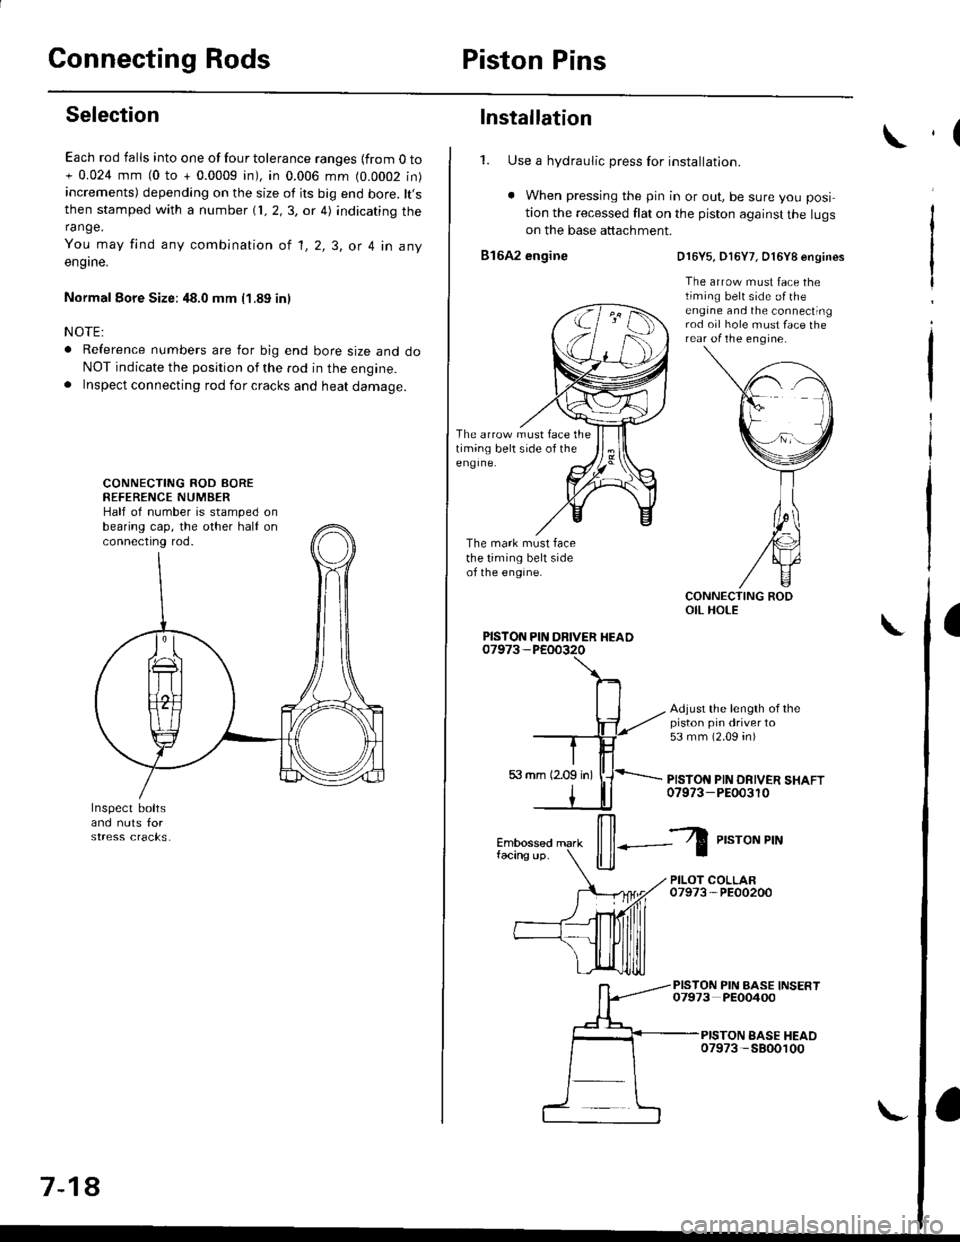 HONDA CIVIC 1997 6.G Workshop Manual Connecting RodsPiston Pins
Selection
Each rod falls into one of four tolerance ranges {from O to+ 0.024 mm (0 to + 0.0009 in), in 0.006 mm (0.0002 in)increments) depending on the size of its big end b